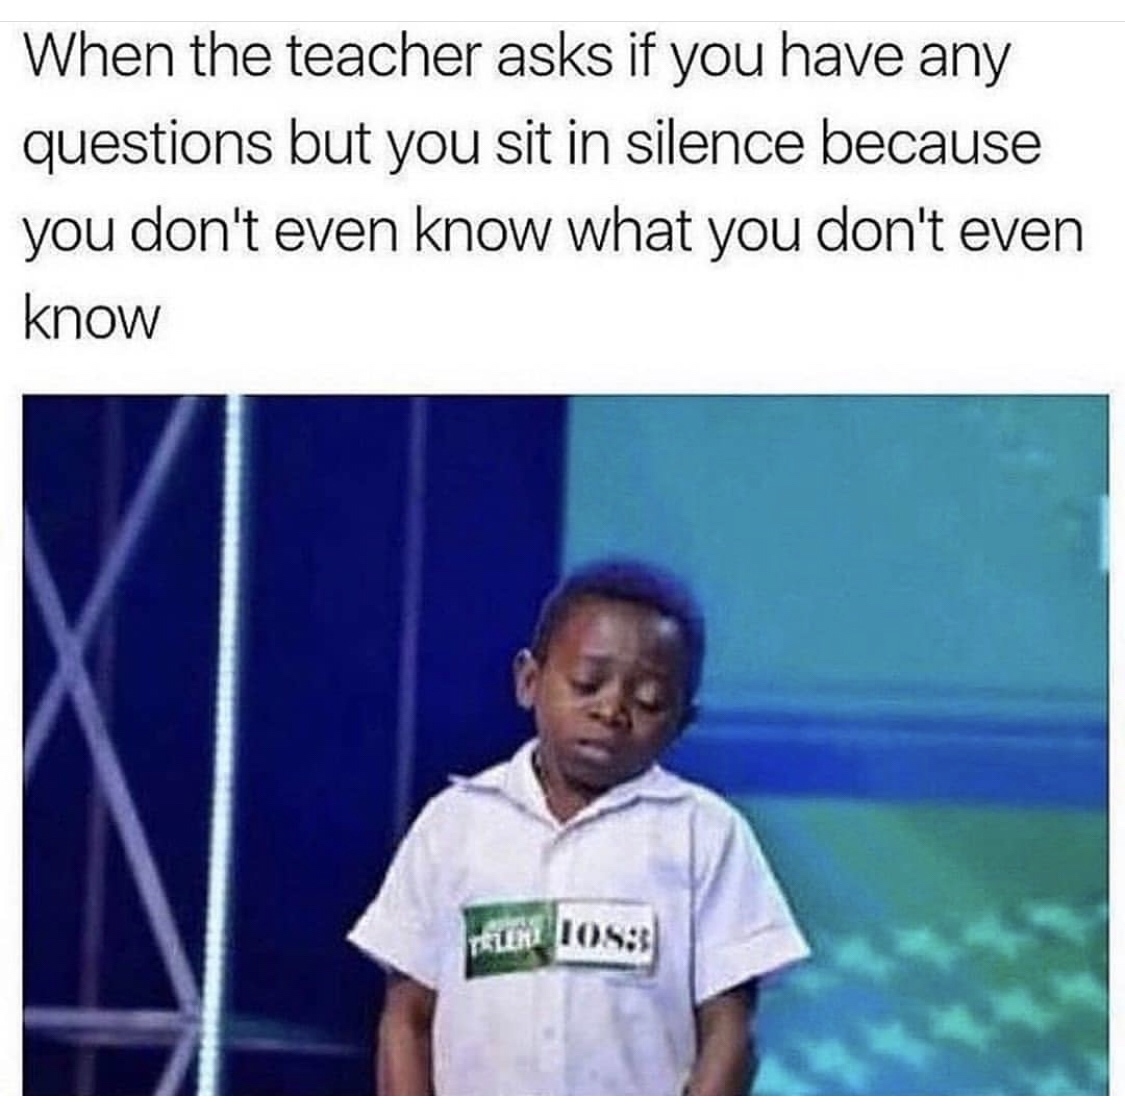 funny memes that are relatable - When the teacher asks if you have any questions but you sit in silence because you don't even know what you don't even know